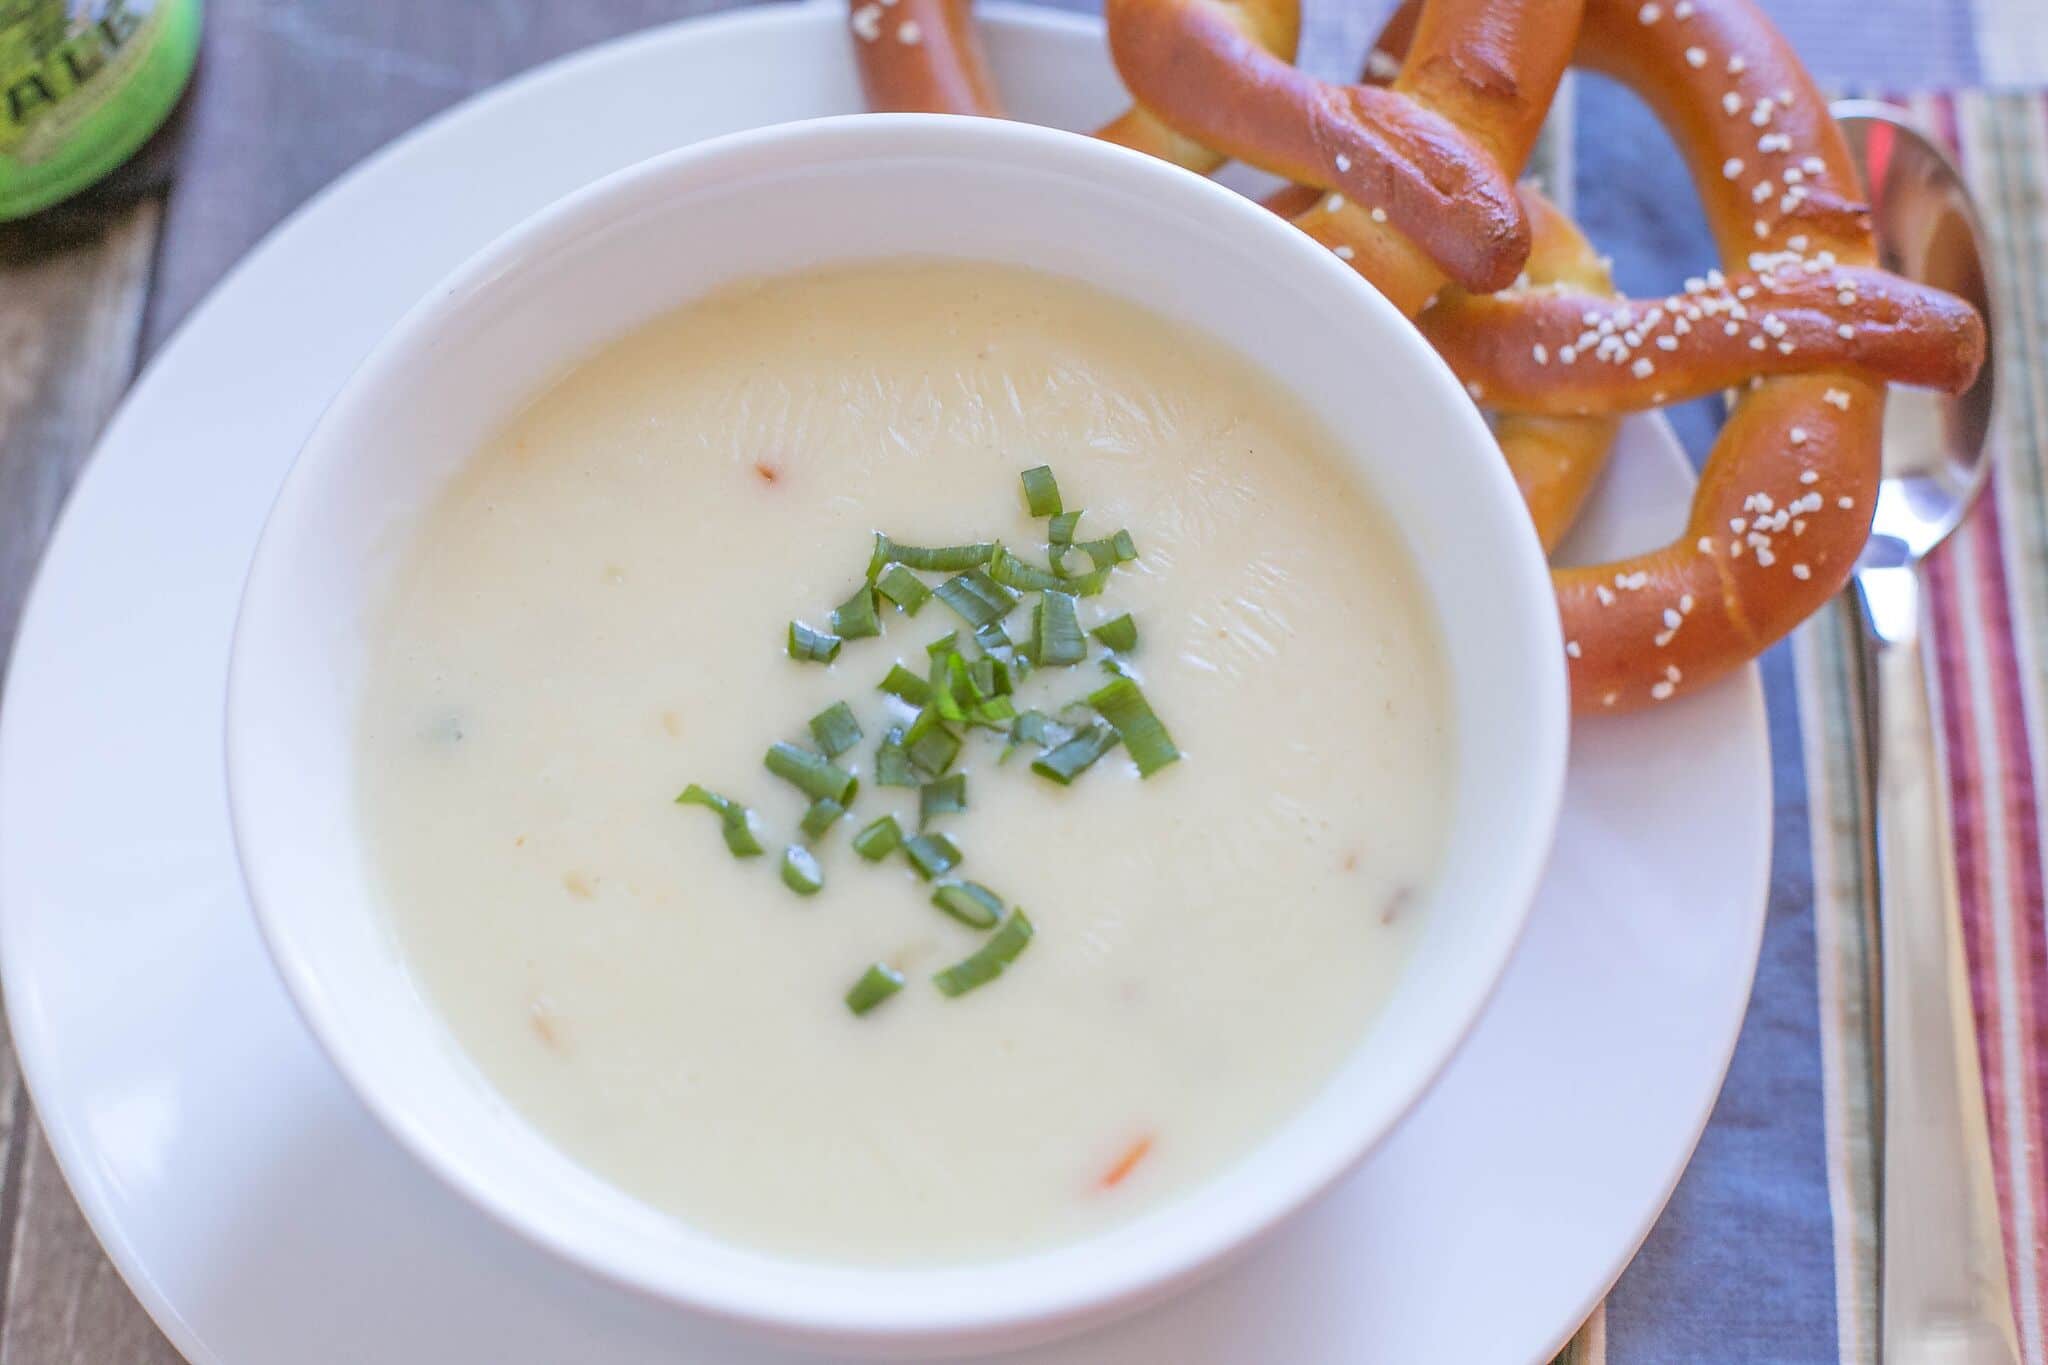 Once cooked, spoon into bowls and serve hot with warm soft pretzels.